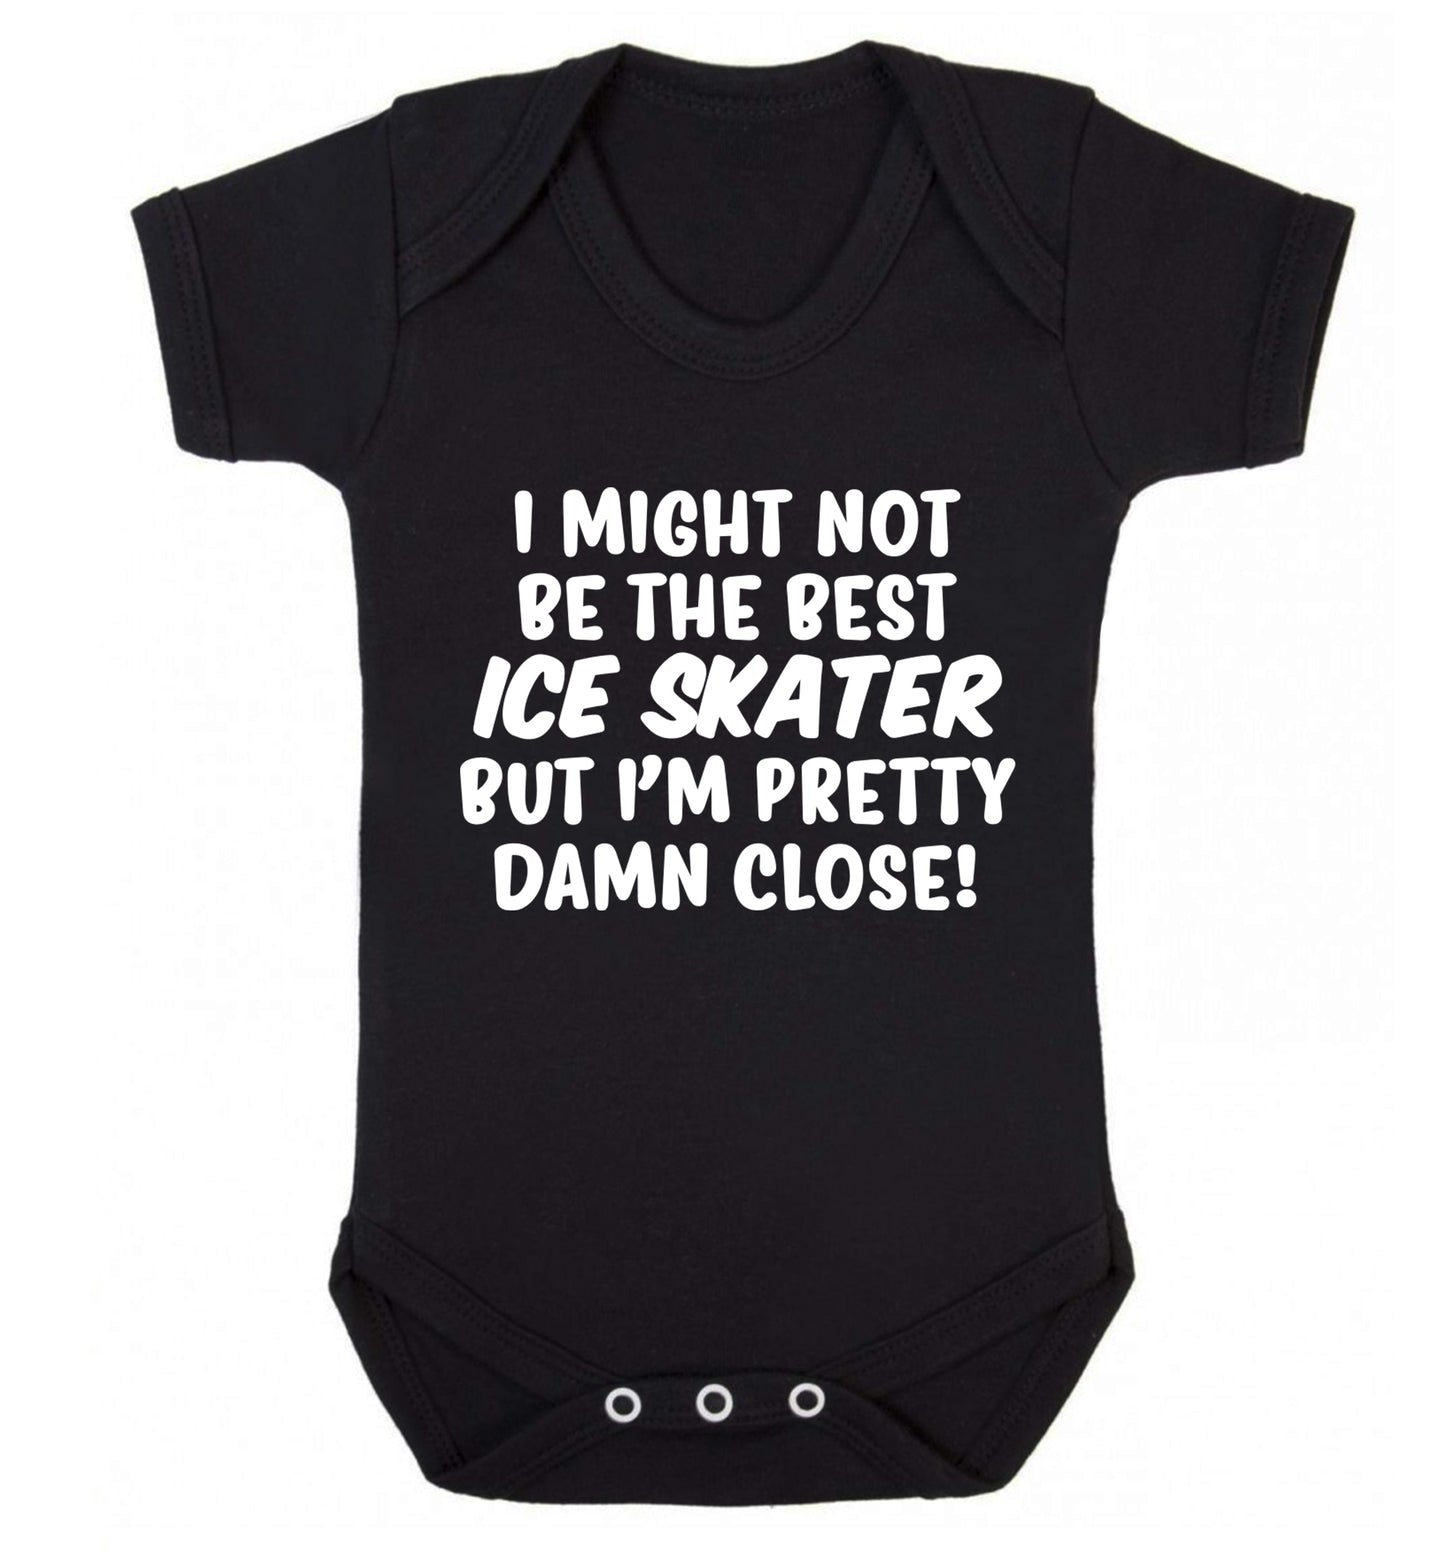 I might not be the best ice skater but I'm pretty damn close! Baby Vest black 18-24 months